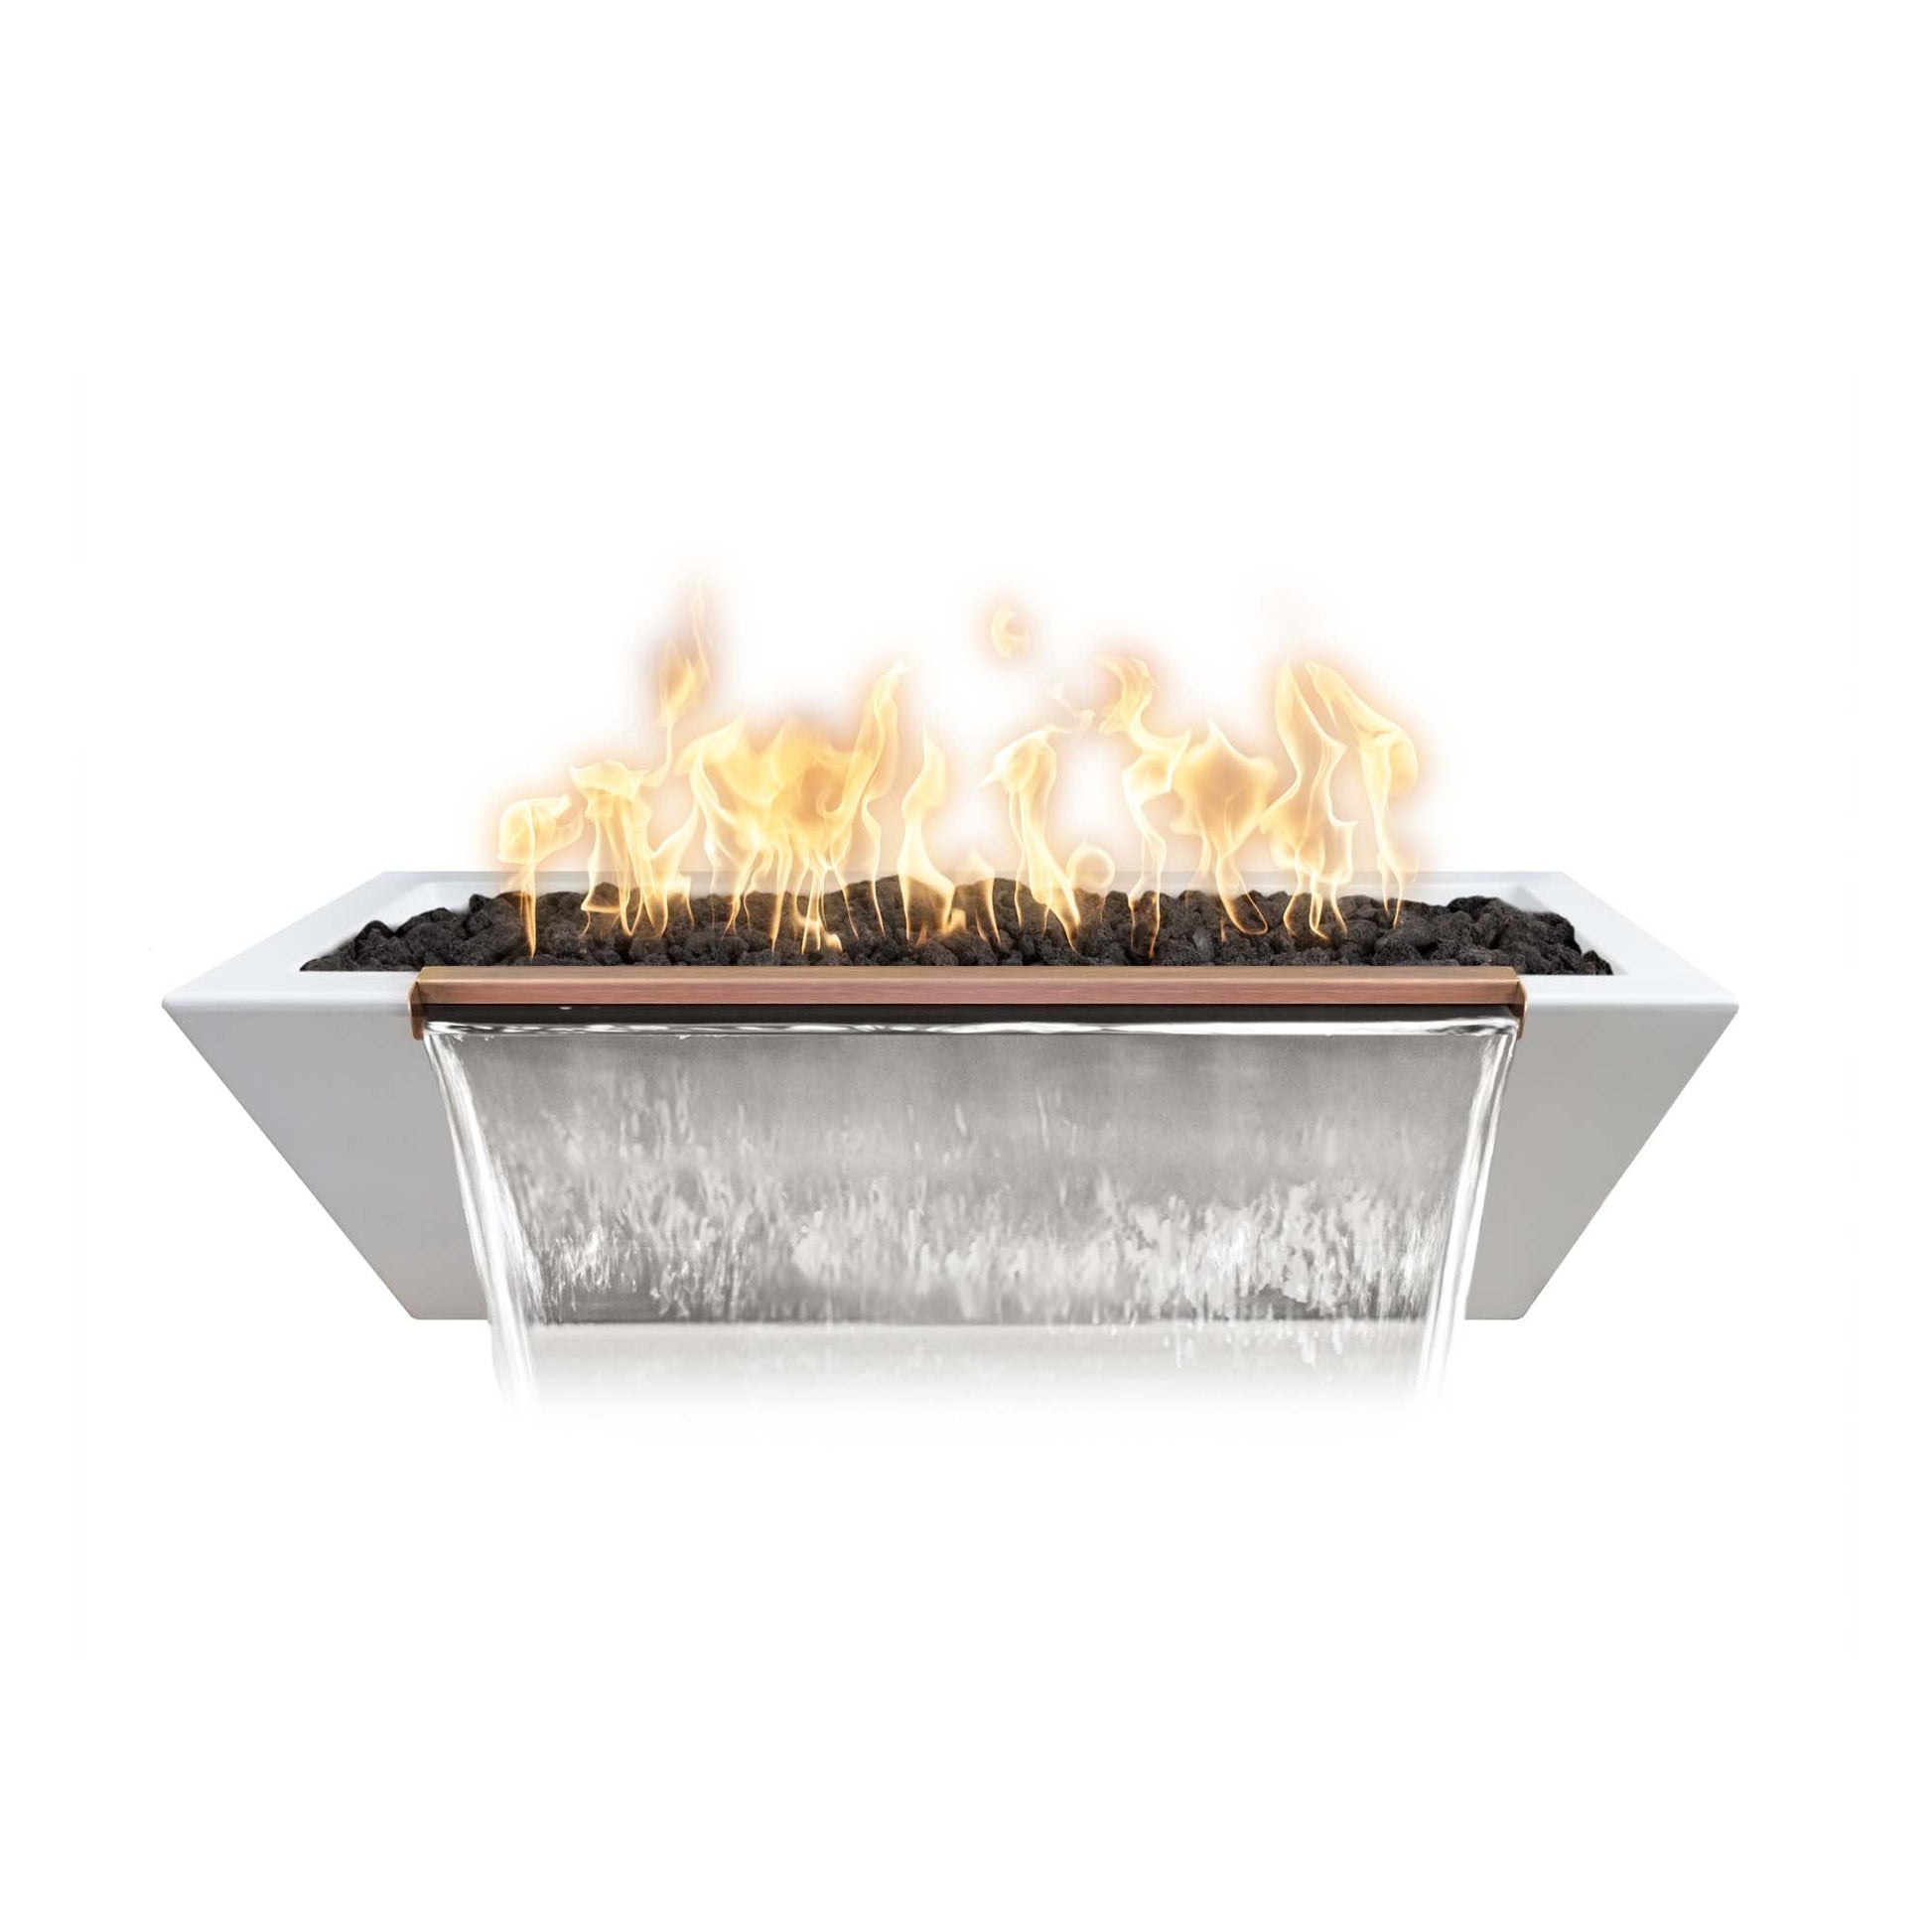 The Outdoor Plus Linear Maya 72" White GFRC Concrete Natural Gas Fire & Water Bowl with 12V Electronic Ignition